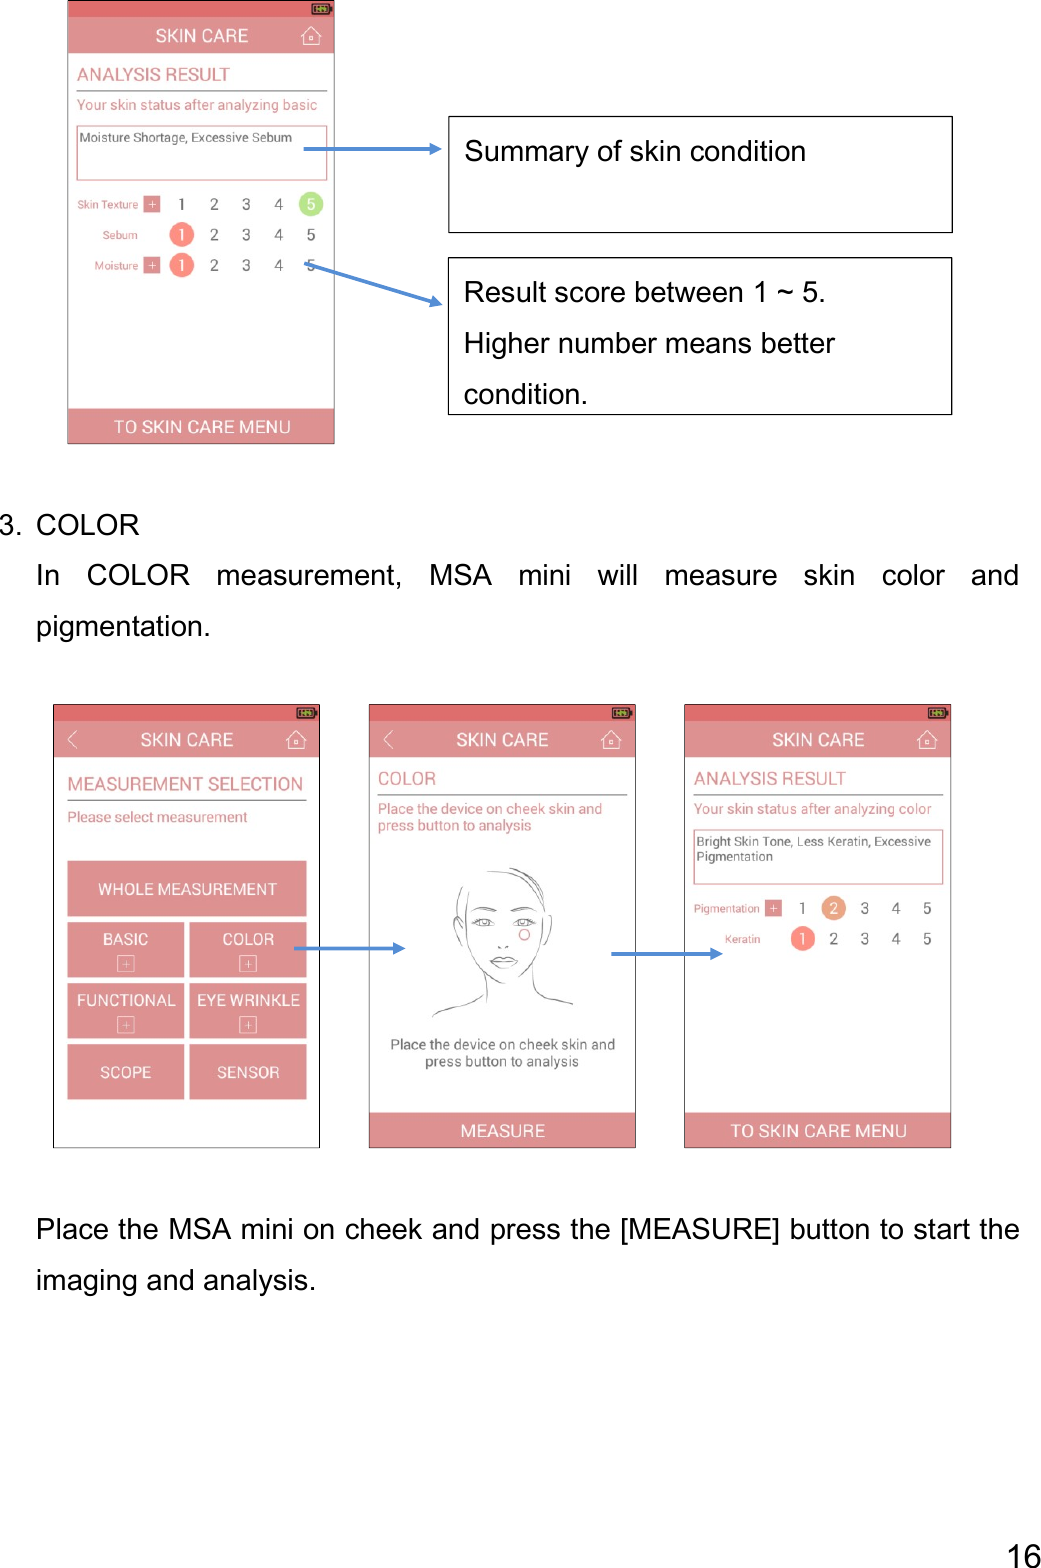  16       3. COLOR In  COLOR  measurement,  MSA  mini  will  measure  skin  color  and pigmentation.                    Place the MSA mini on cheek and press the [MEASURE] button to start the imaging and analysis.    Summary of skin condition Result score between 1 ~ 5.   Higher number means better   condition.  